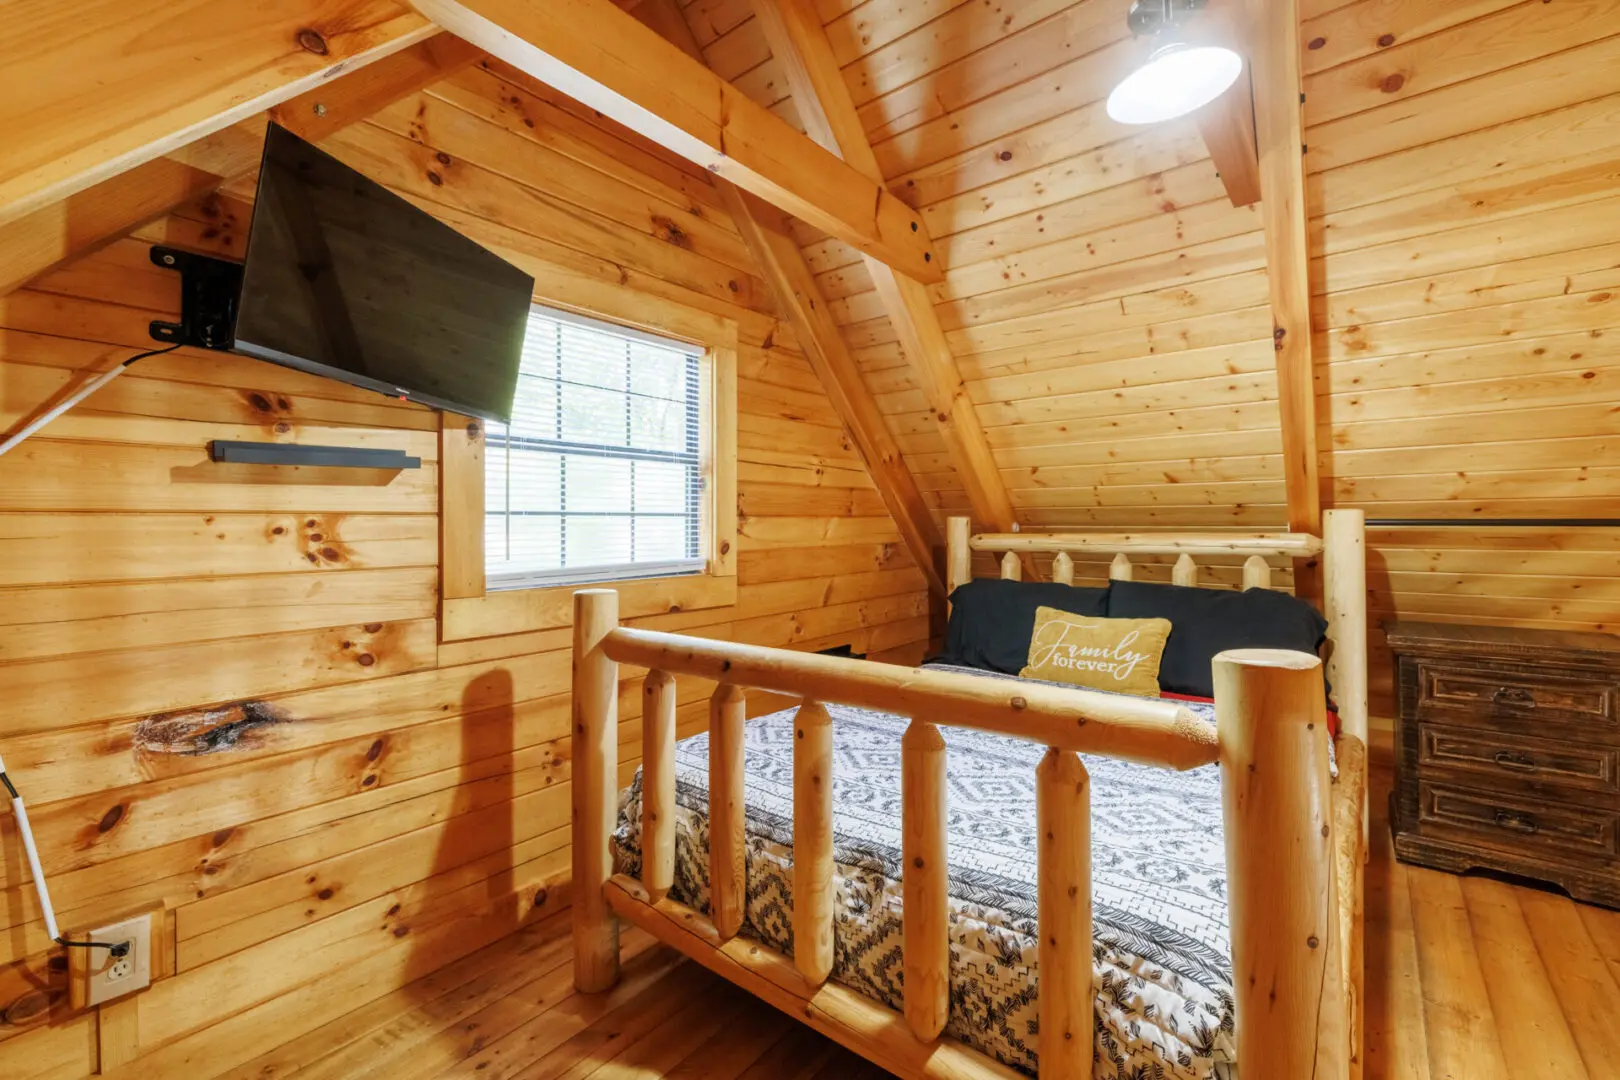 A bedroom in a log cabin with a tv.